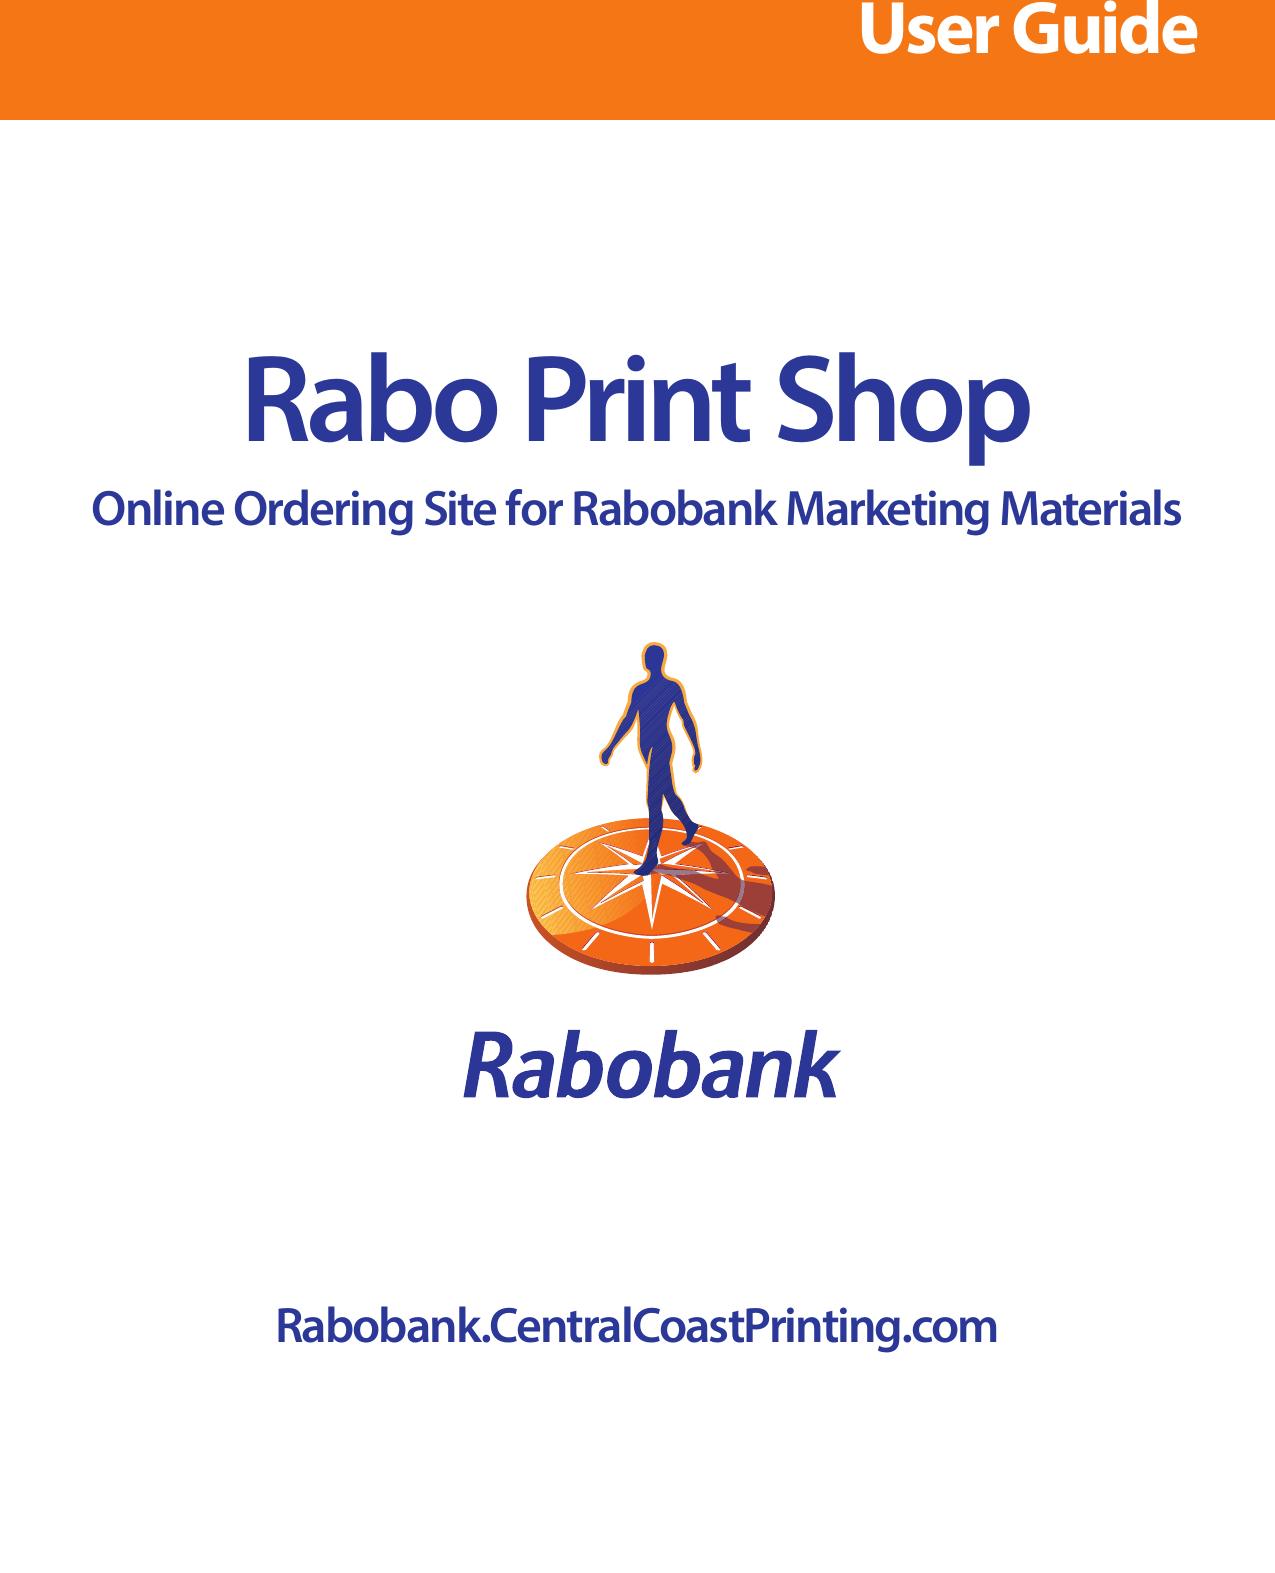 Page 1 of 10 - Rabo Print Shop User Guide